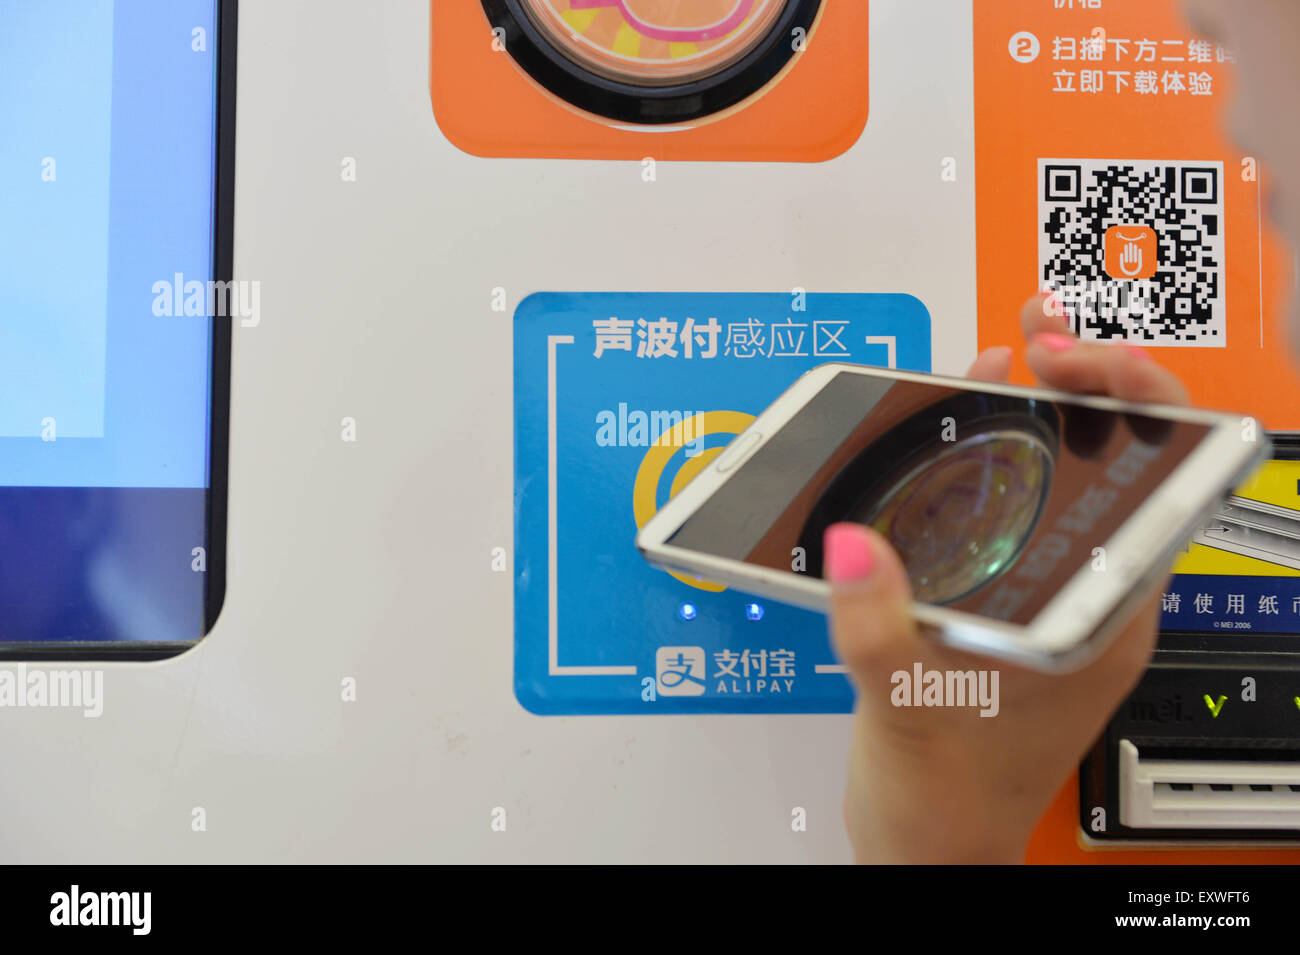 Shanghai, China. 17th July, 2015. A visitor experiences the sound wave payment function of mobile phone during the Mobile World Congress Shanghai in Shanghai, east China, July 17, 2015. The Mobile World Congress Shanghai was held here from July 15 to July 17. Credit:  Liu Xiaojing/Xinhua/Alamy Live News Stock Photo